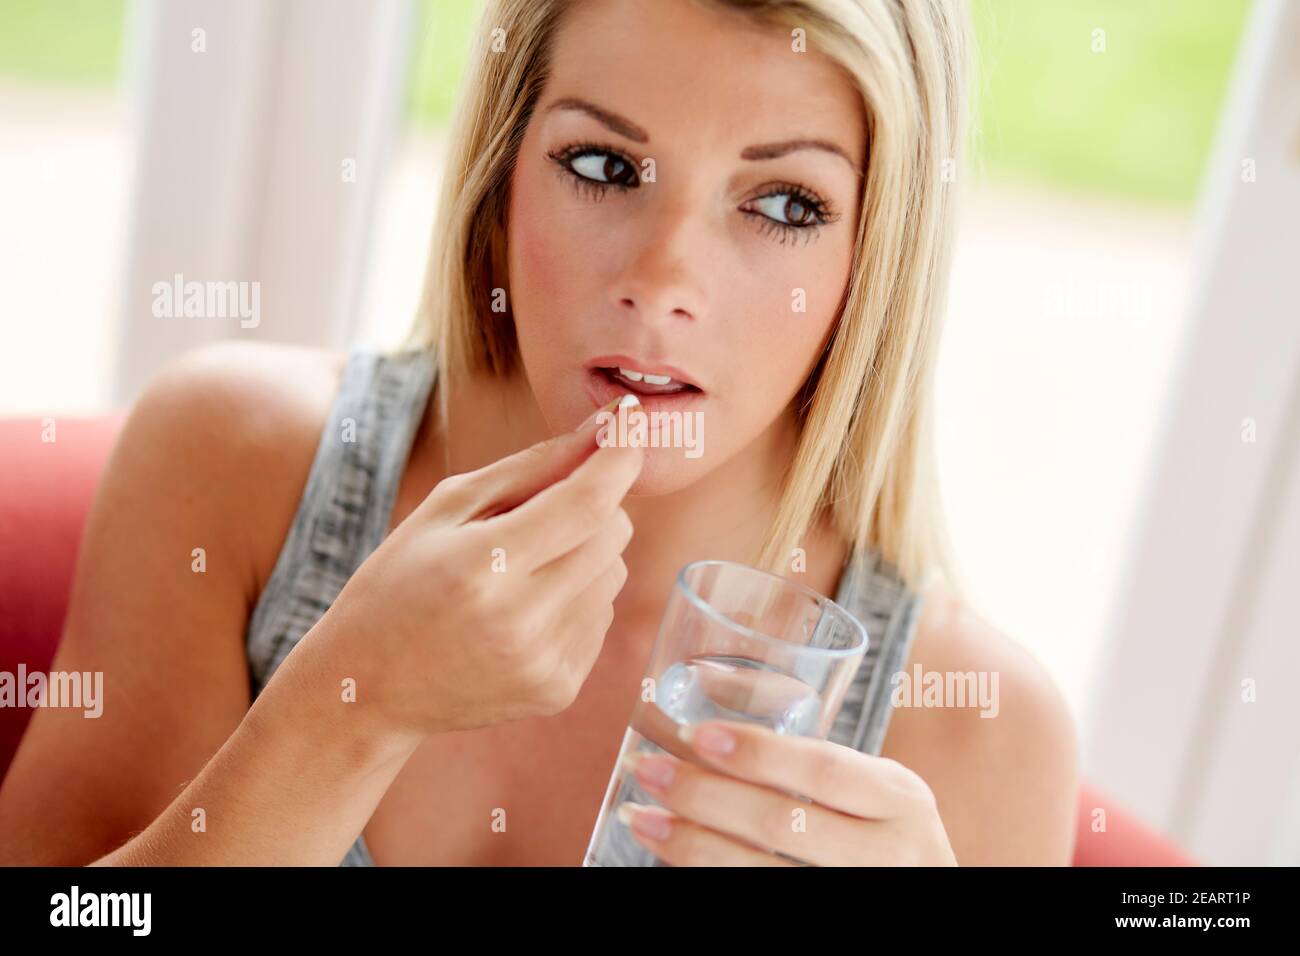 Woman taking tablet with glass of water Stock Photo